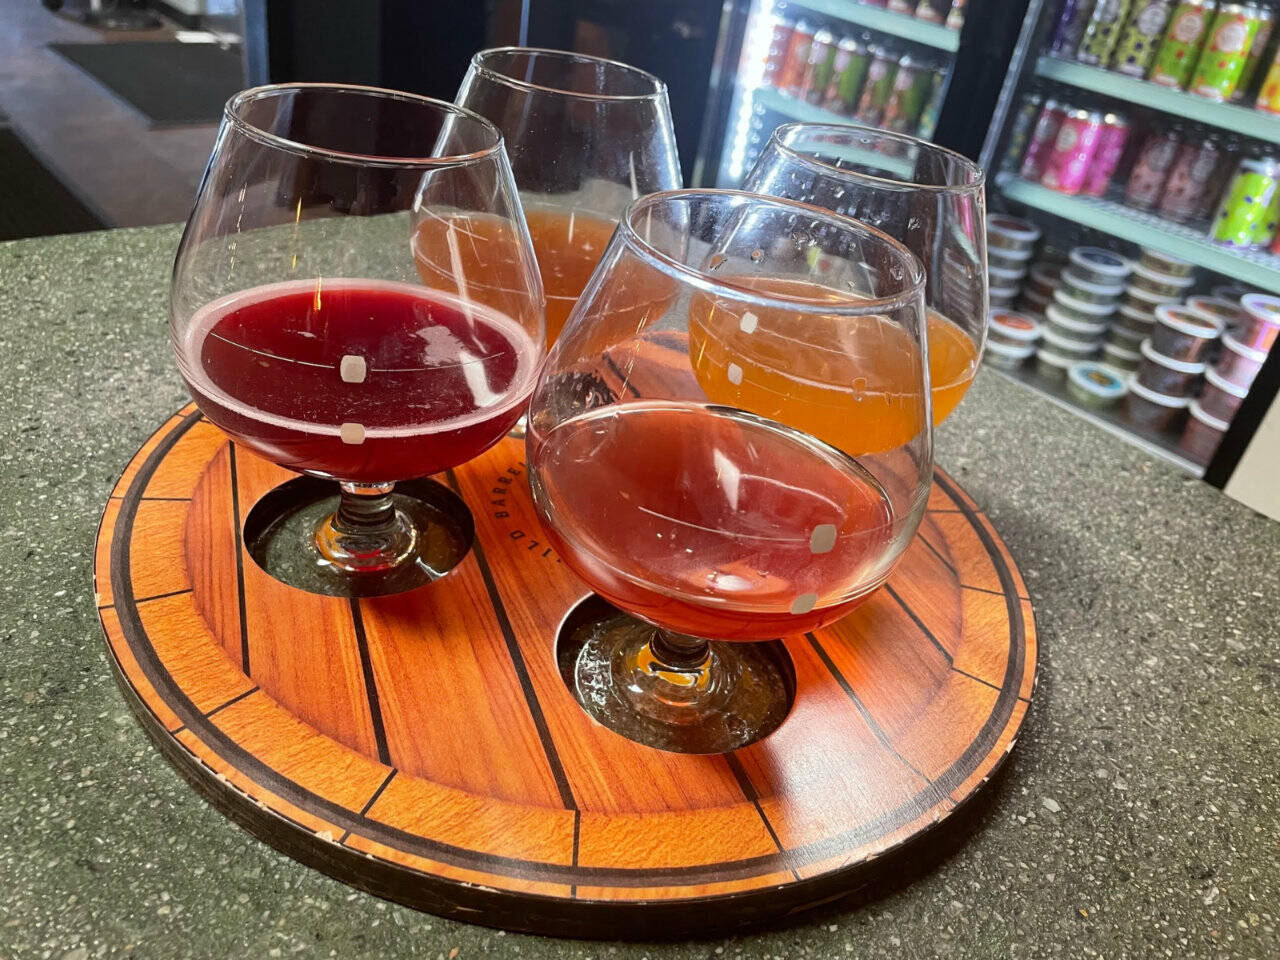 A sour tasting flight from Wild Barrel Brewing of San Marcos, California. (Aaron Swaney)